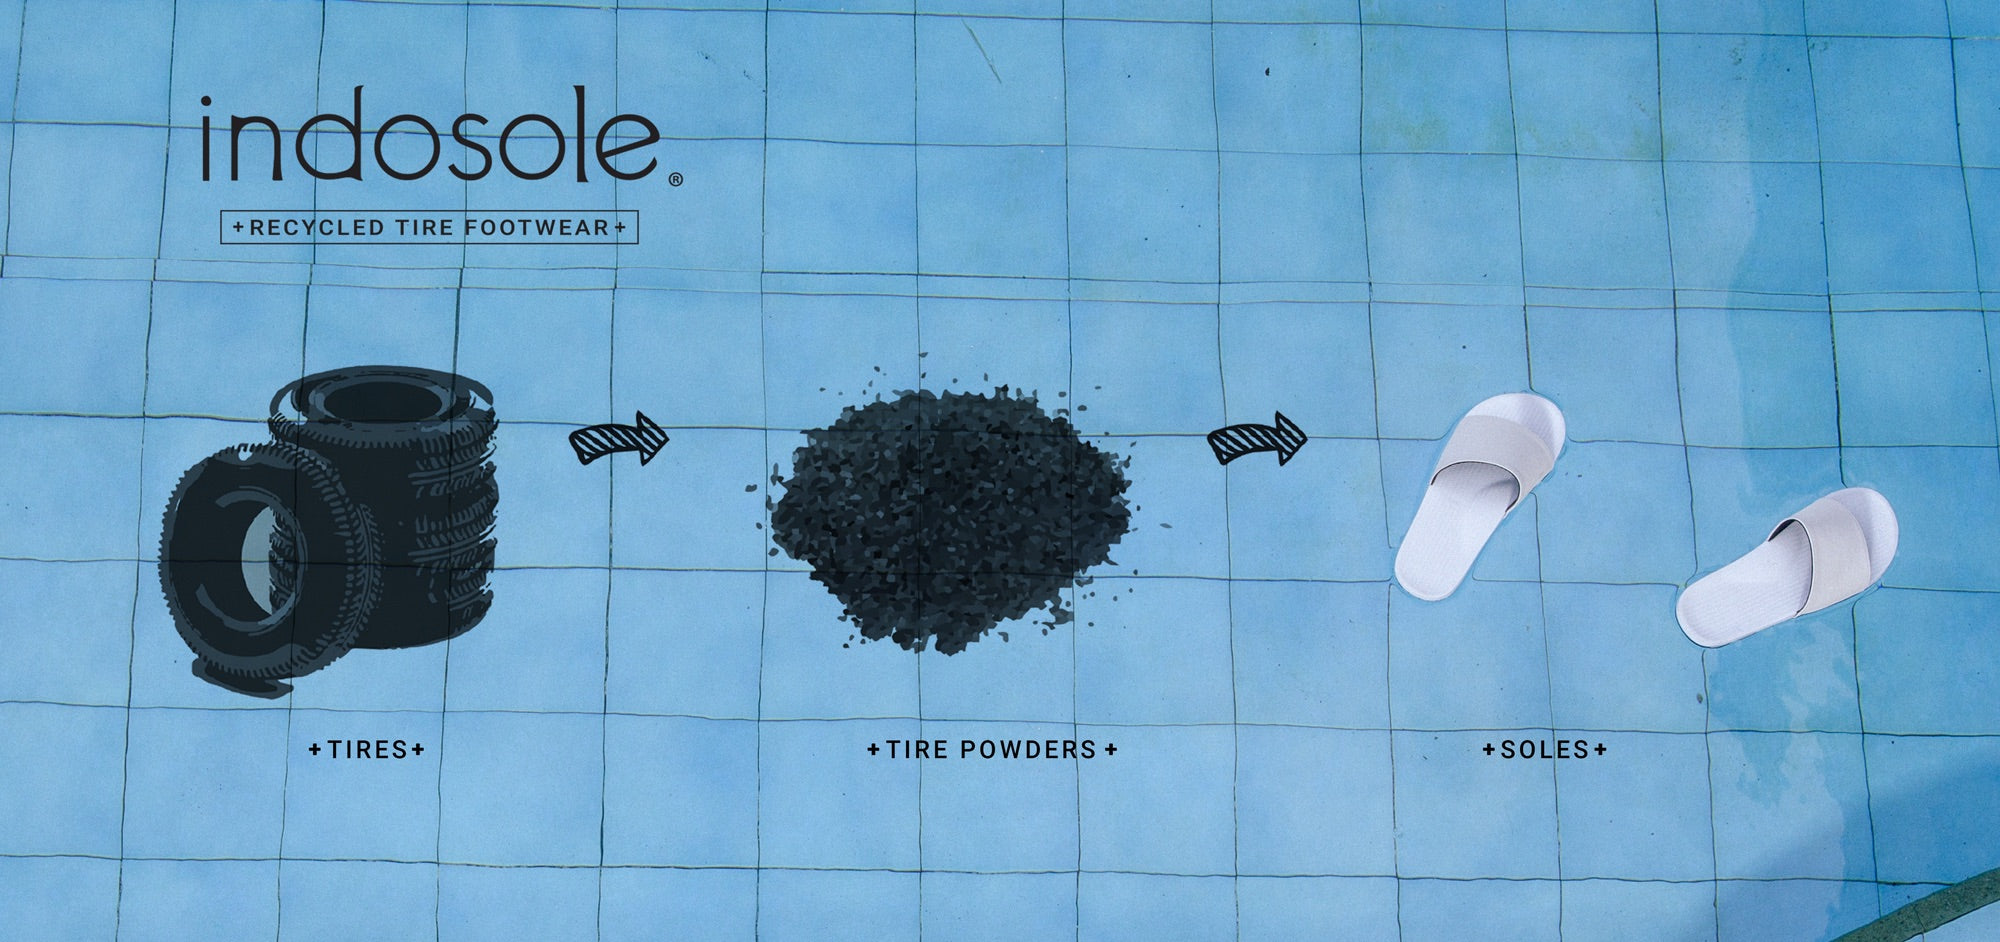 Indosole infographic: from tires to tire powder, through to flip flops.